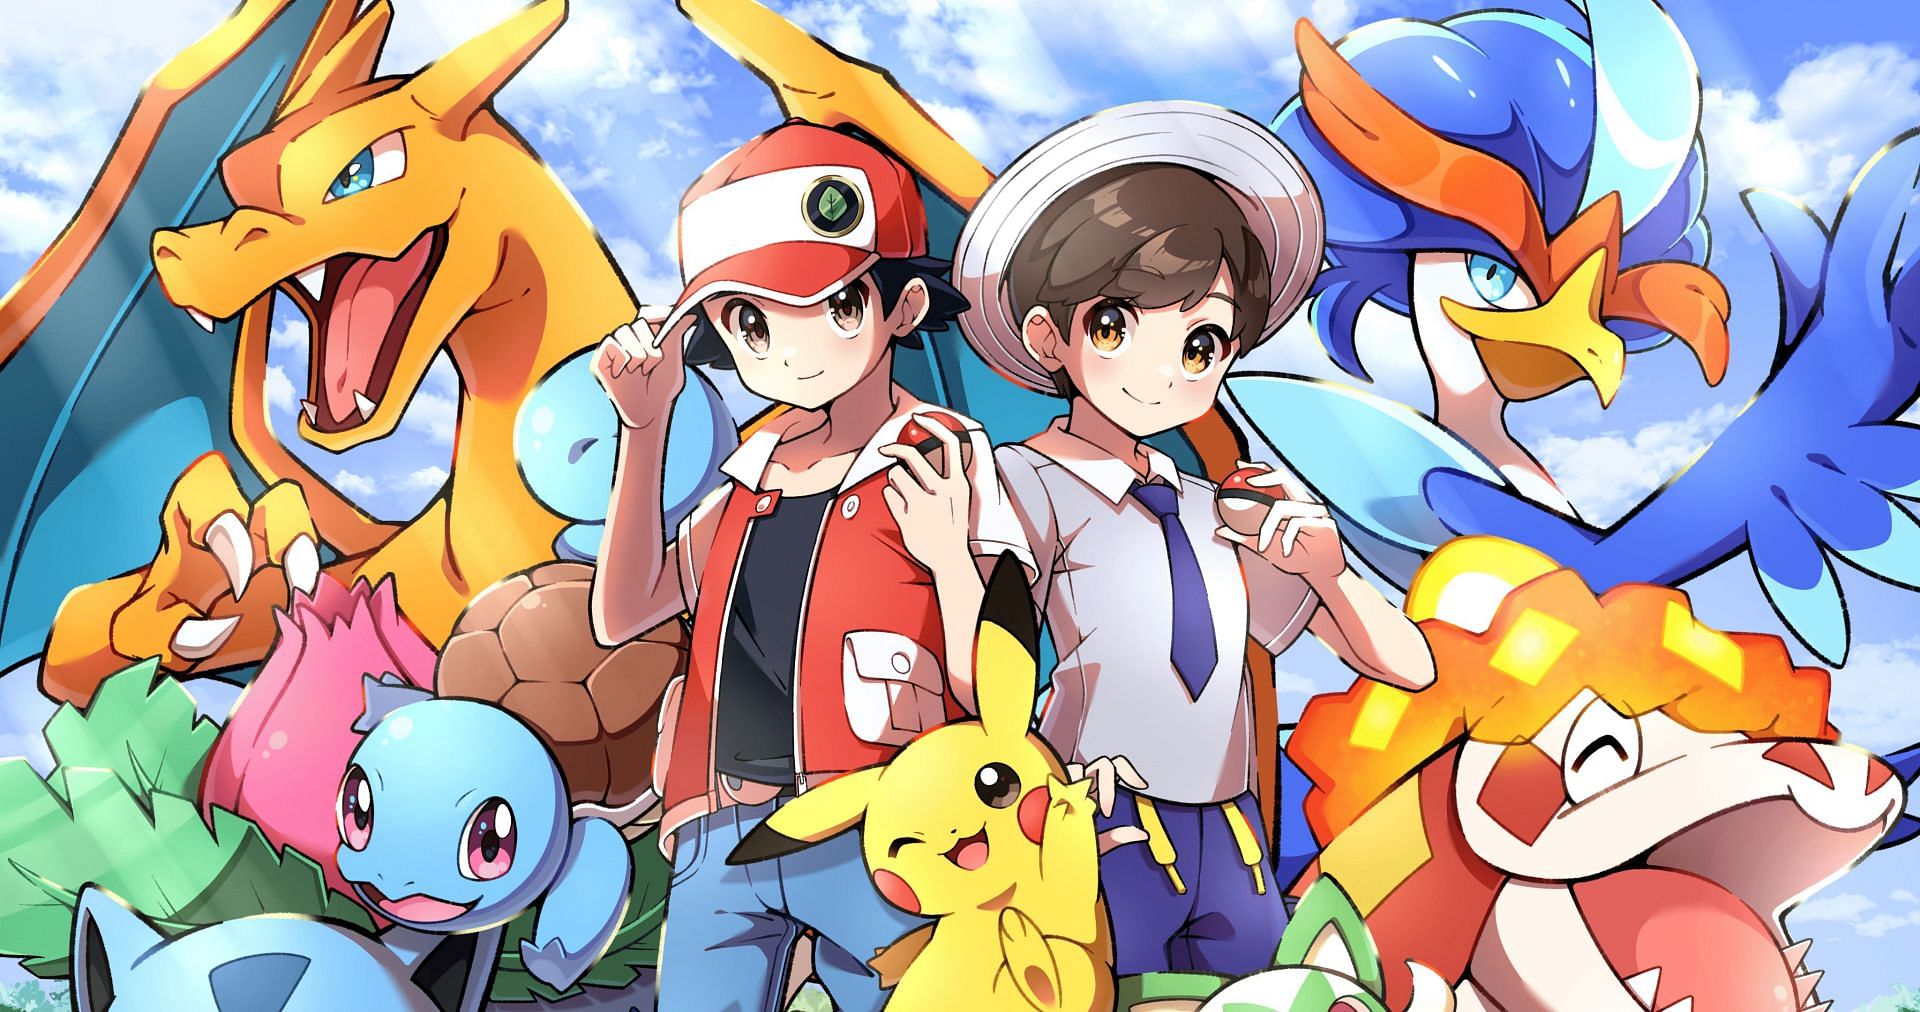 Pokémon: Red Vs. Blue: Who Is The Better Trainer?